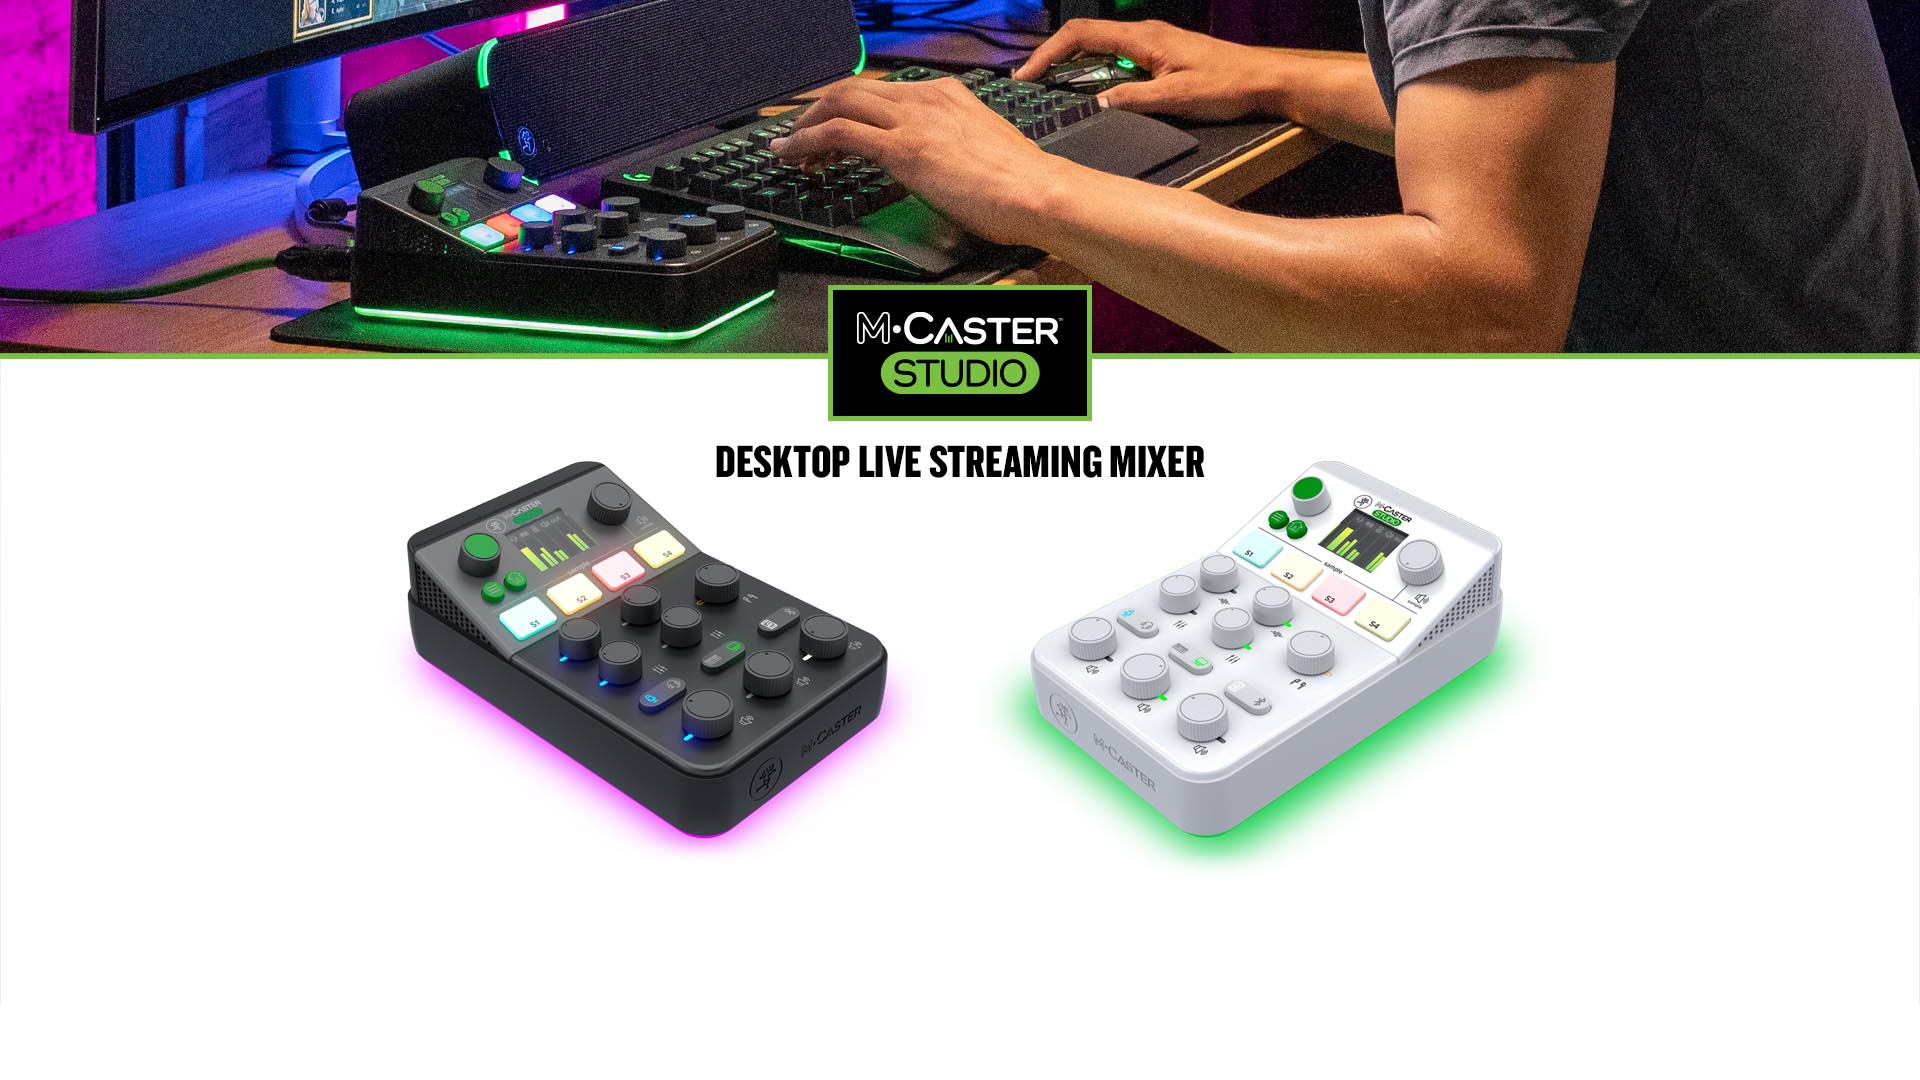 Mackie M-Caster Studio in black and white versions- Audio mixer for live stream content creation with sample pads, metering, and adjustable levels